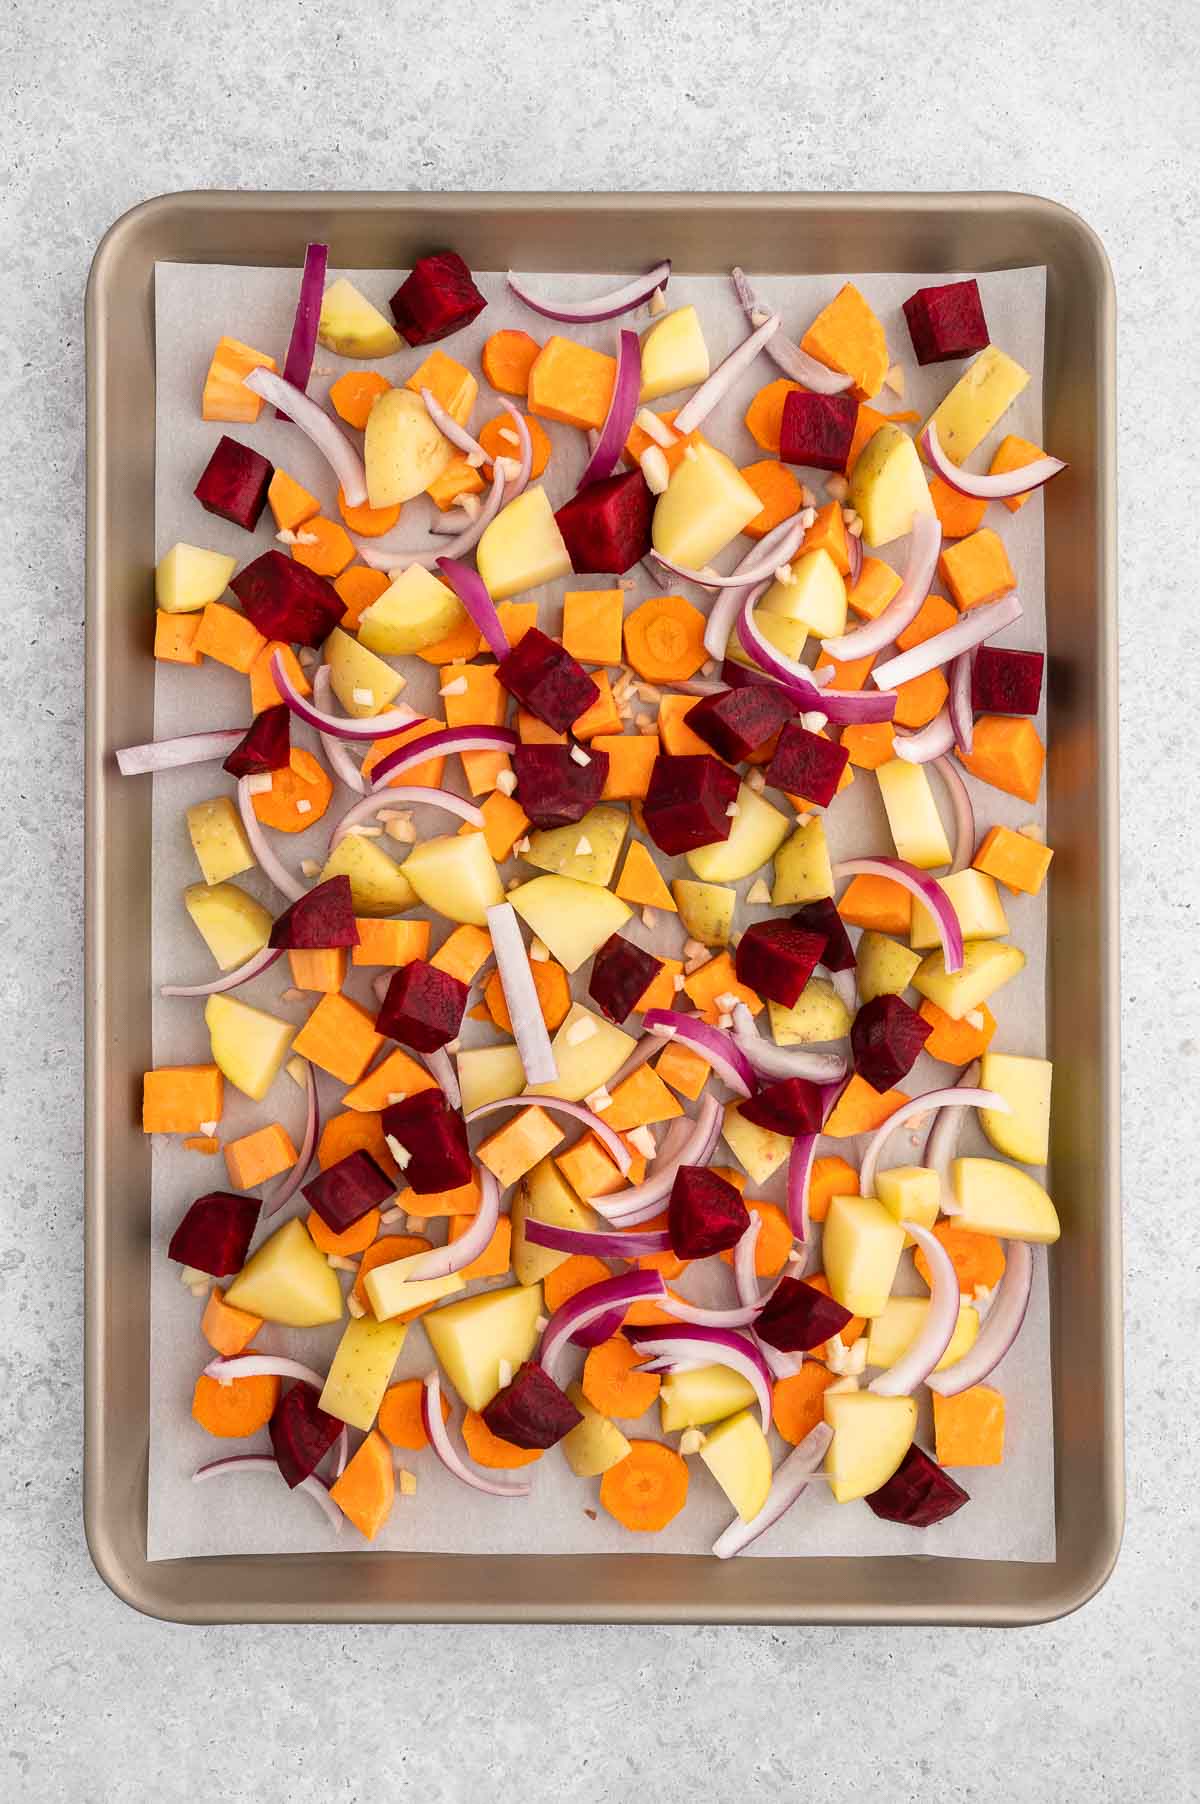 Root vegetables chopped and prepped on a baking sheet.